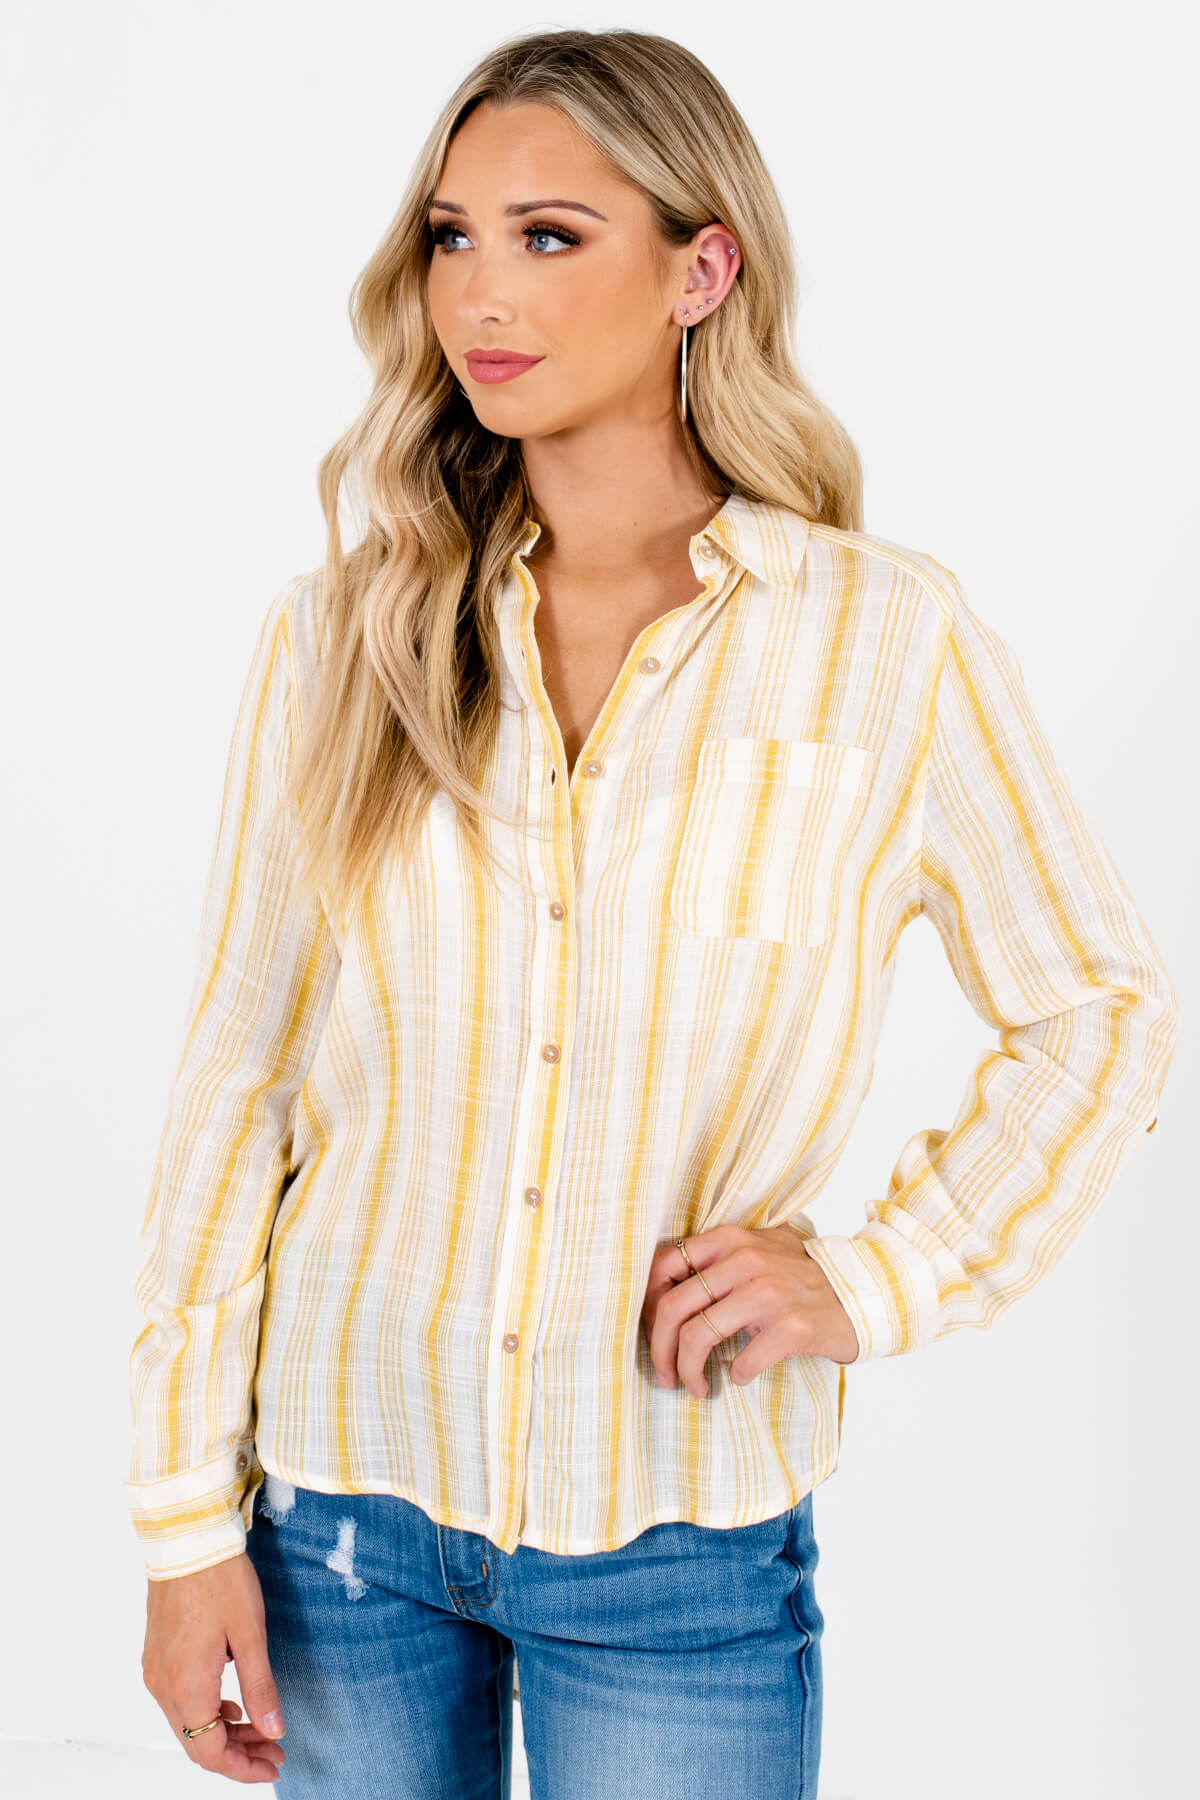 Yellow and White Striped Boutique Shirts for Women